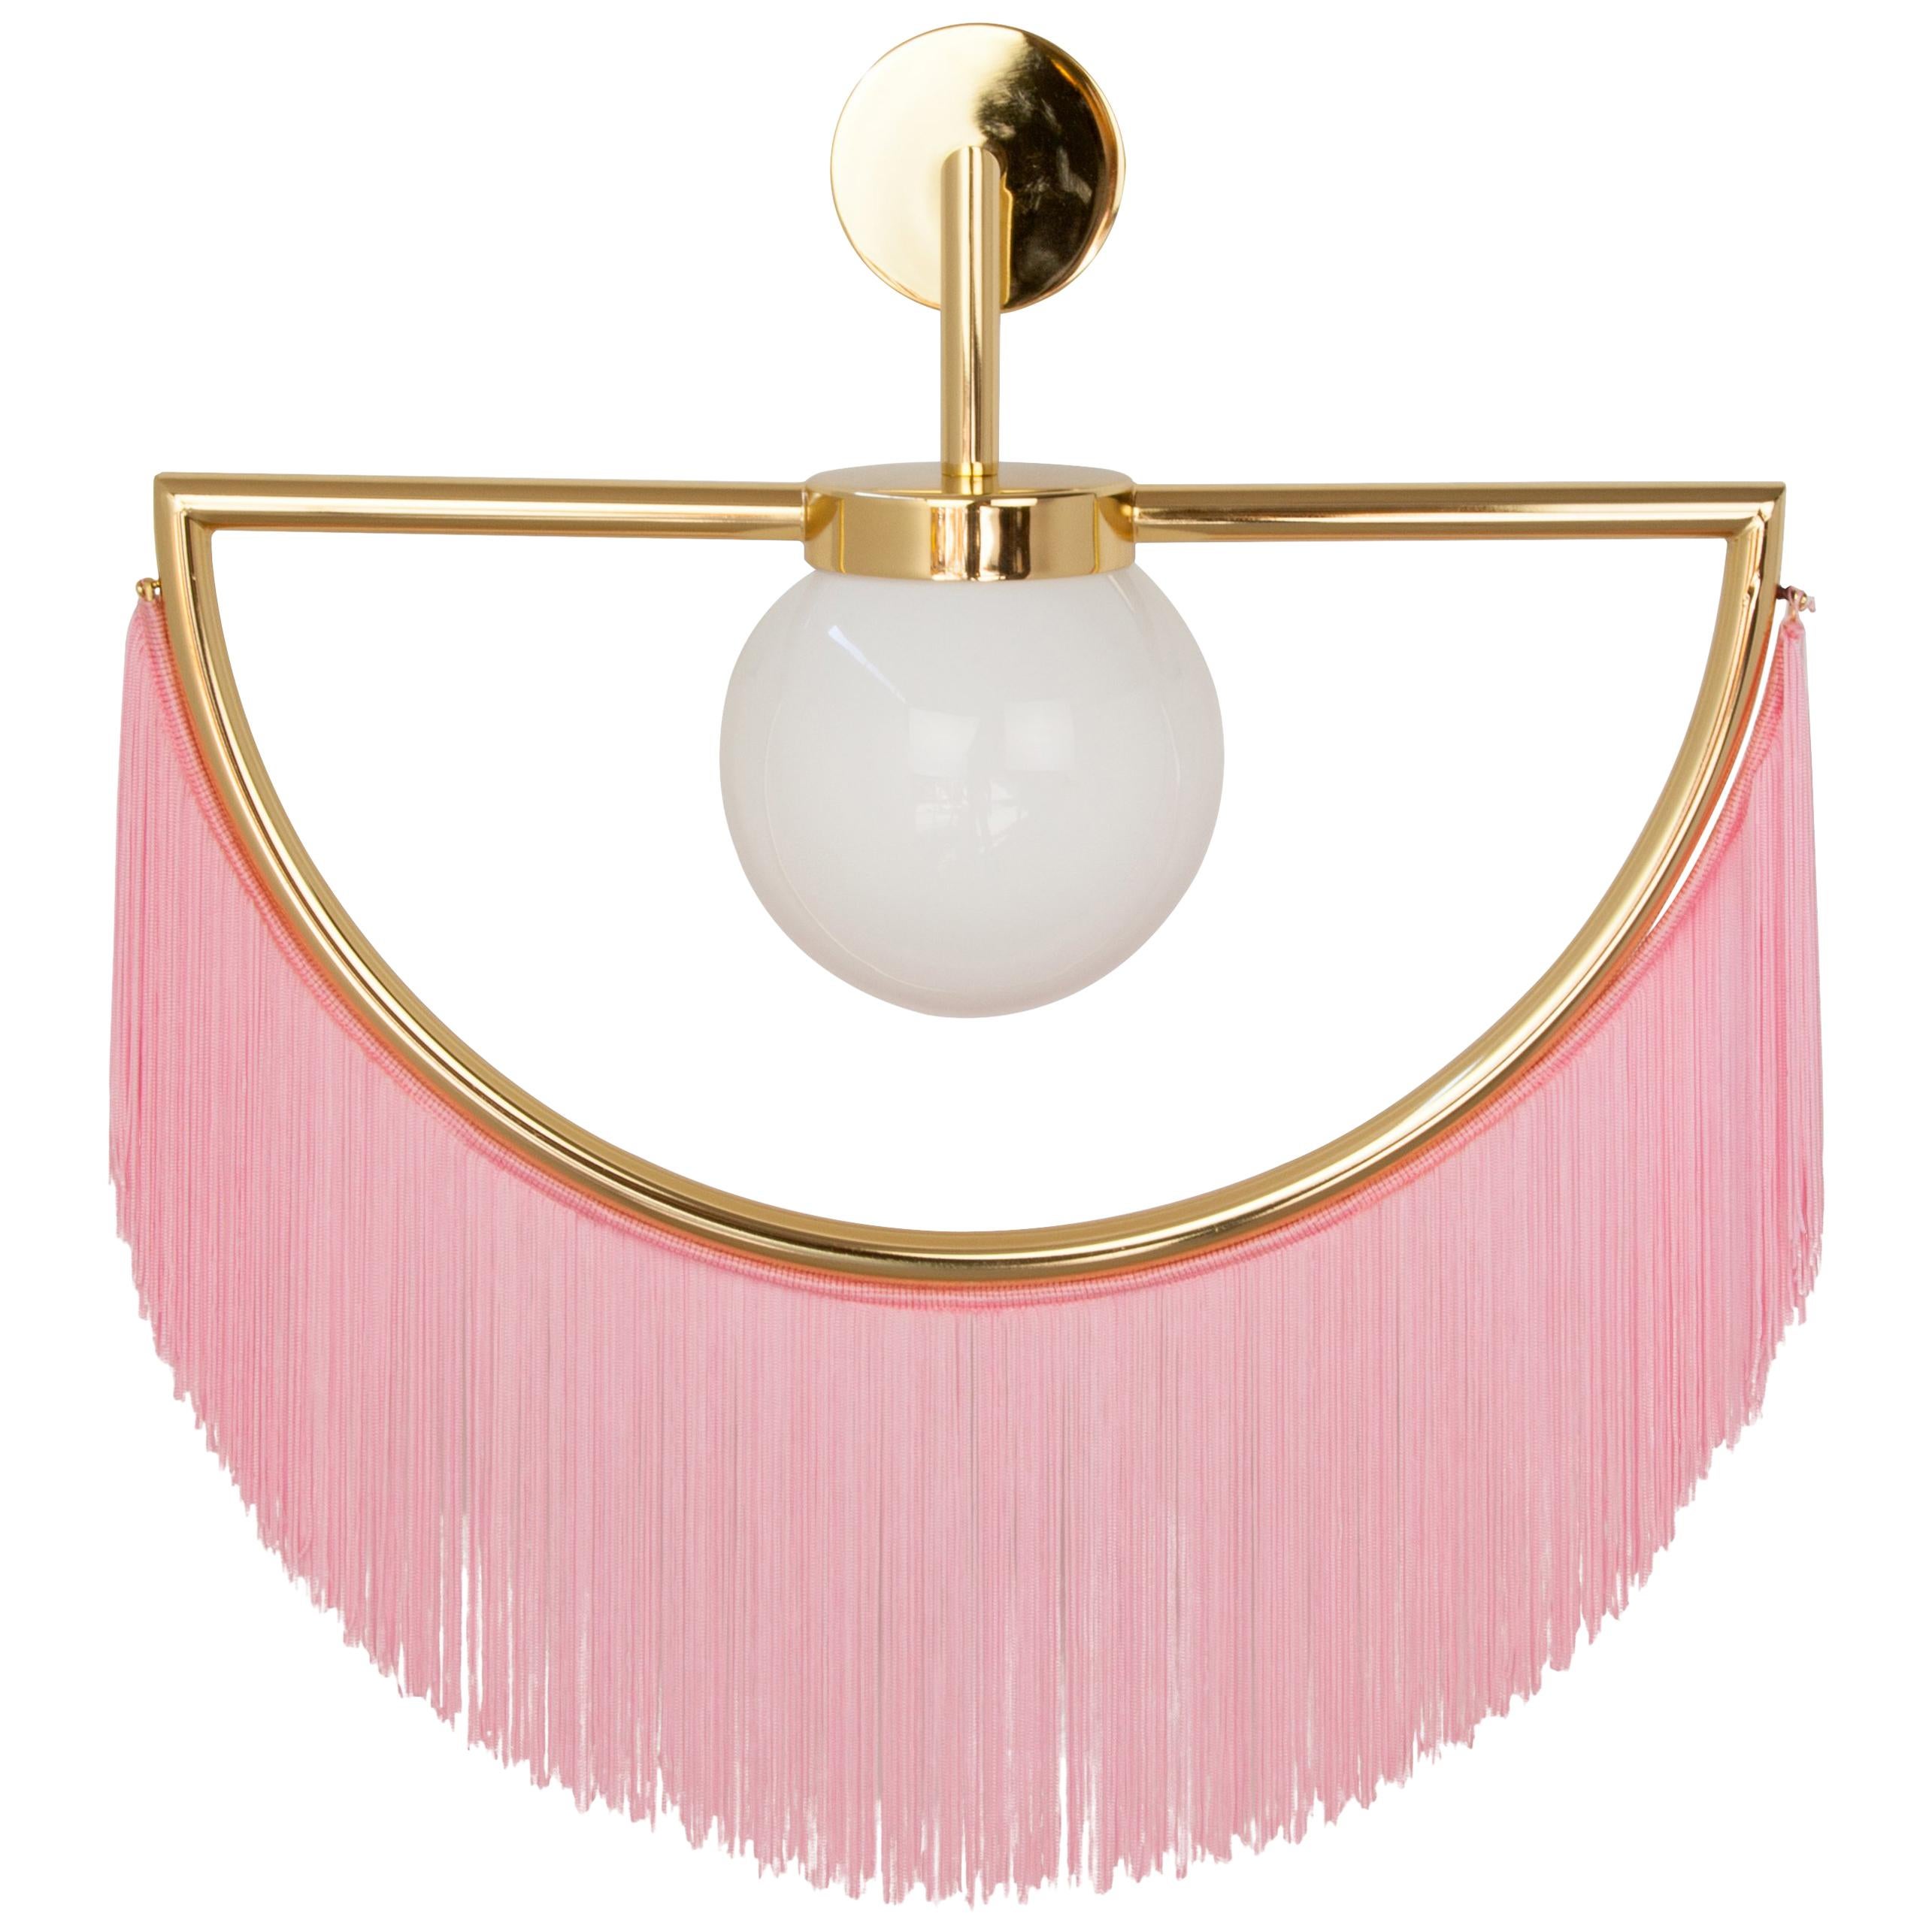 Wink Gold Plated Wall Lamp with Pink Fringes, 1stdibs New York For Sale